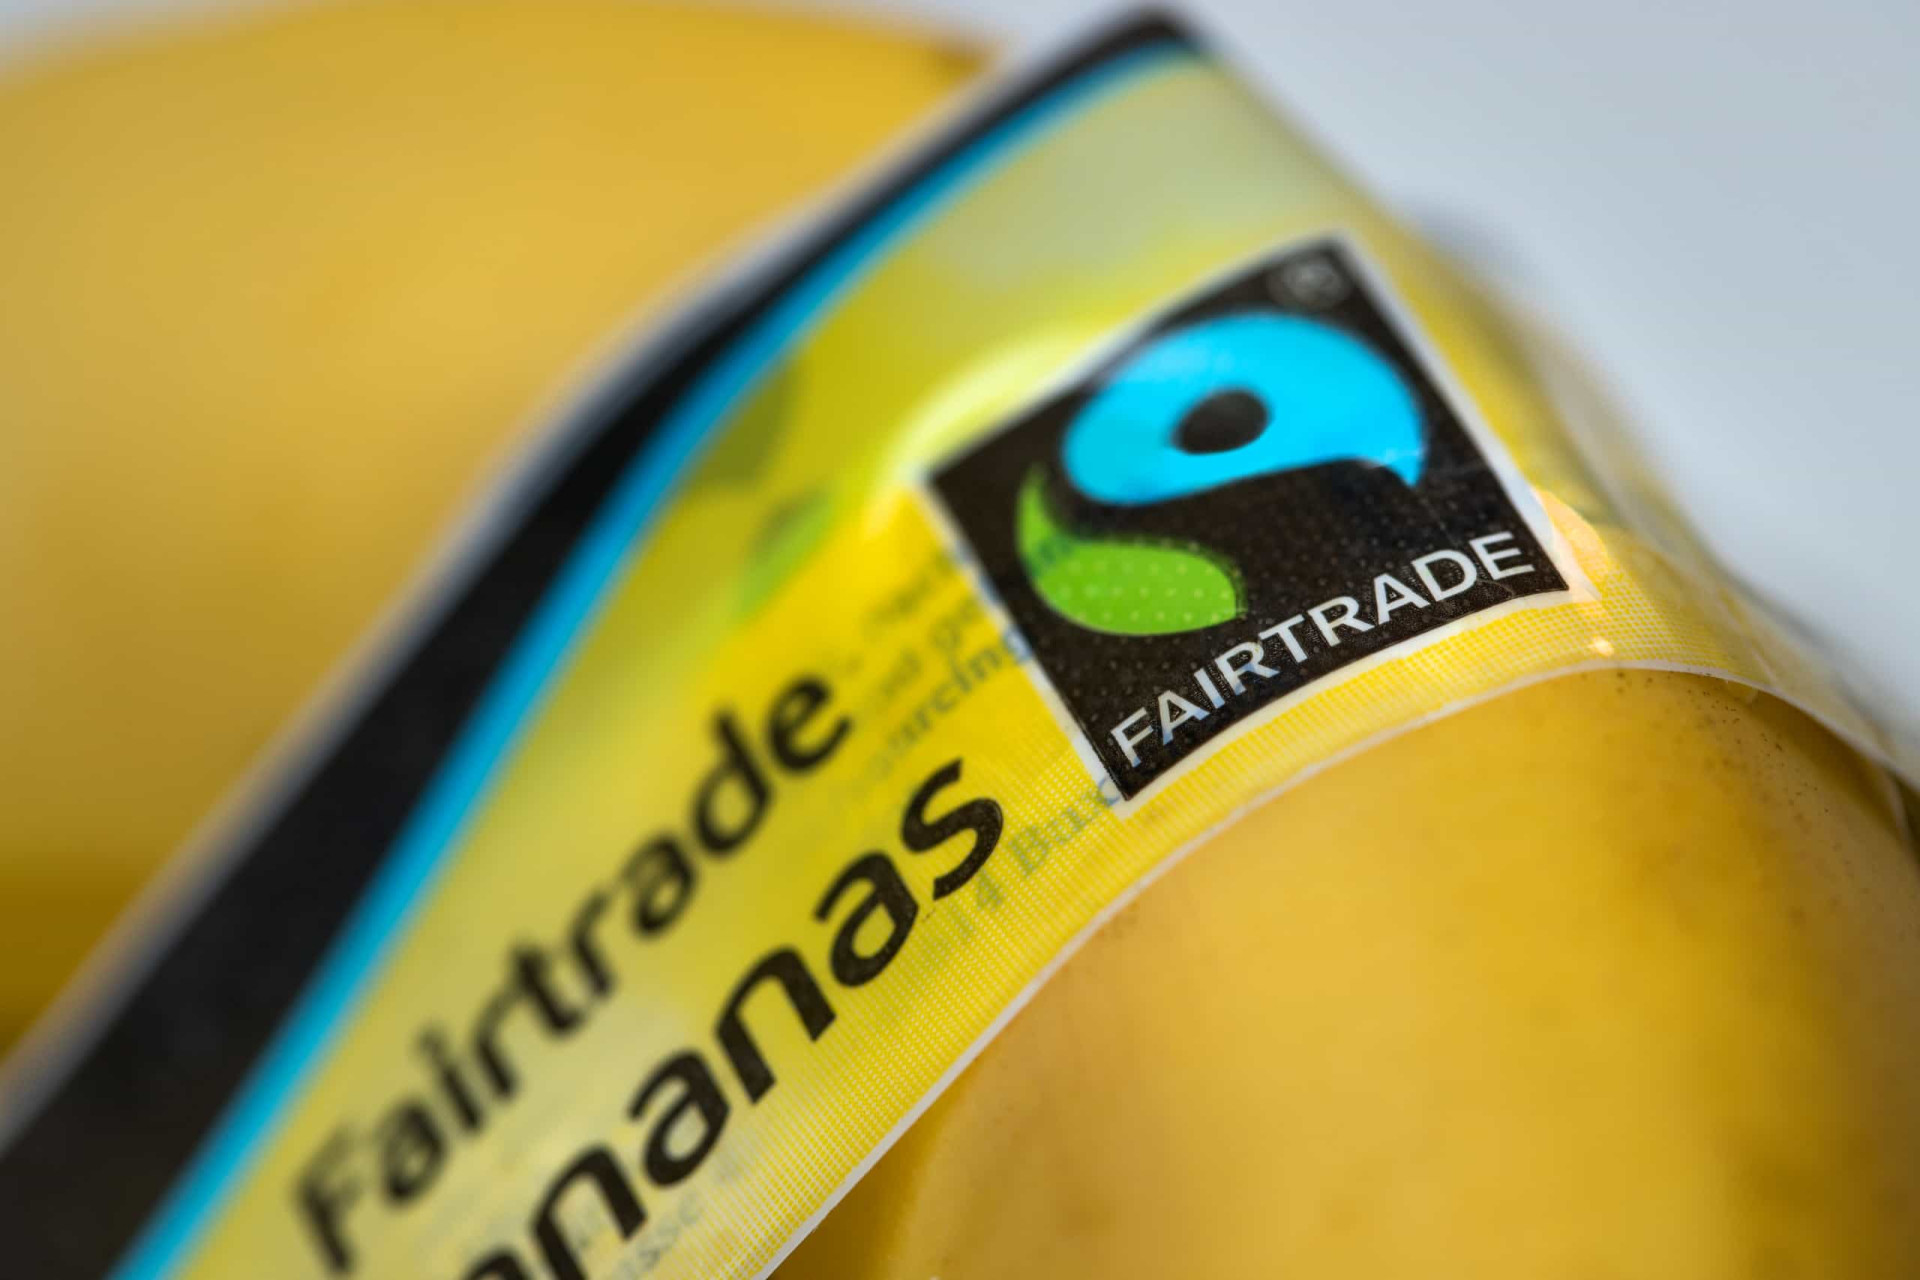 <p>The words "fair trade" and "Fairtrade" don't mean exactly the same thing. The Fairtrade logo can only be used by organizations, brands, and products that are part of the Fairtrade International system and adhere to its rules and values.</p><p><a href="https://www.msn.com/en-us/community/channel/vid-7xx8mnucu55yw63we9va2gwr7uihbxwc68fxqp25x6tg4ftibpra?cvid=94631541bc0f4f89bfd59158d696ad7e">Follow us and access great exclusive content every day</a></p>